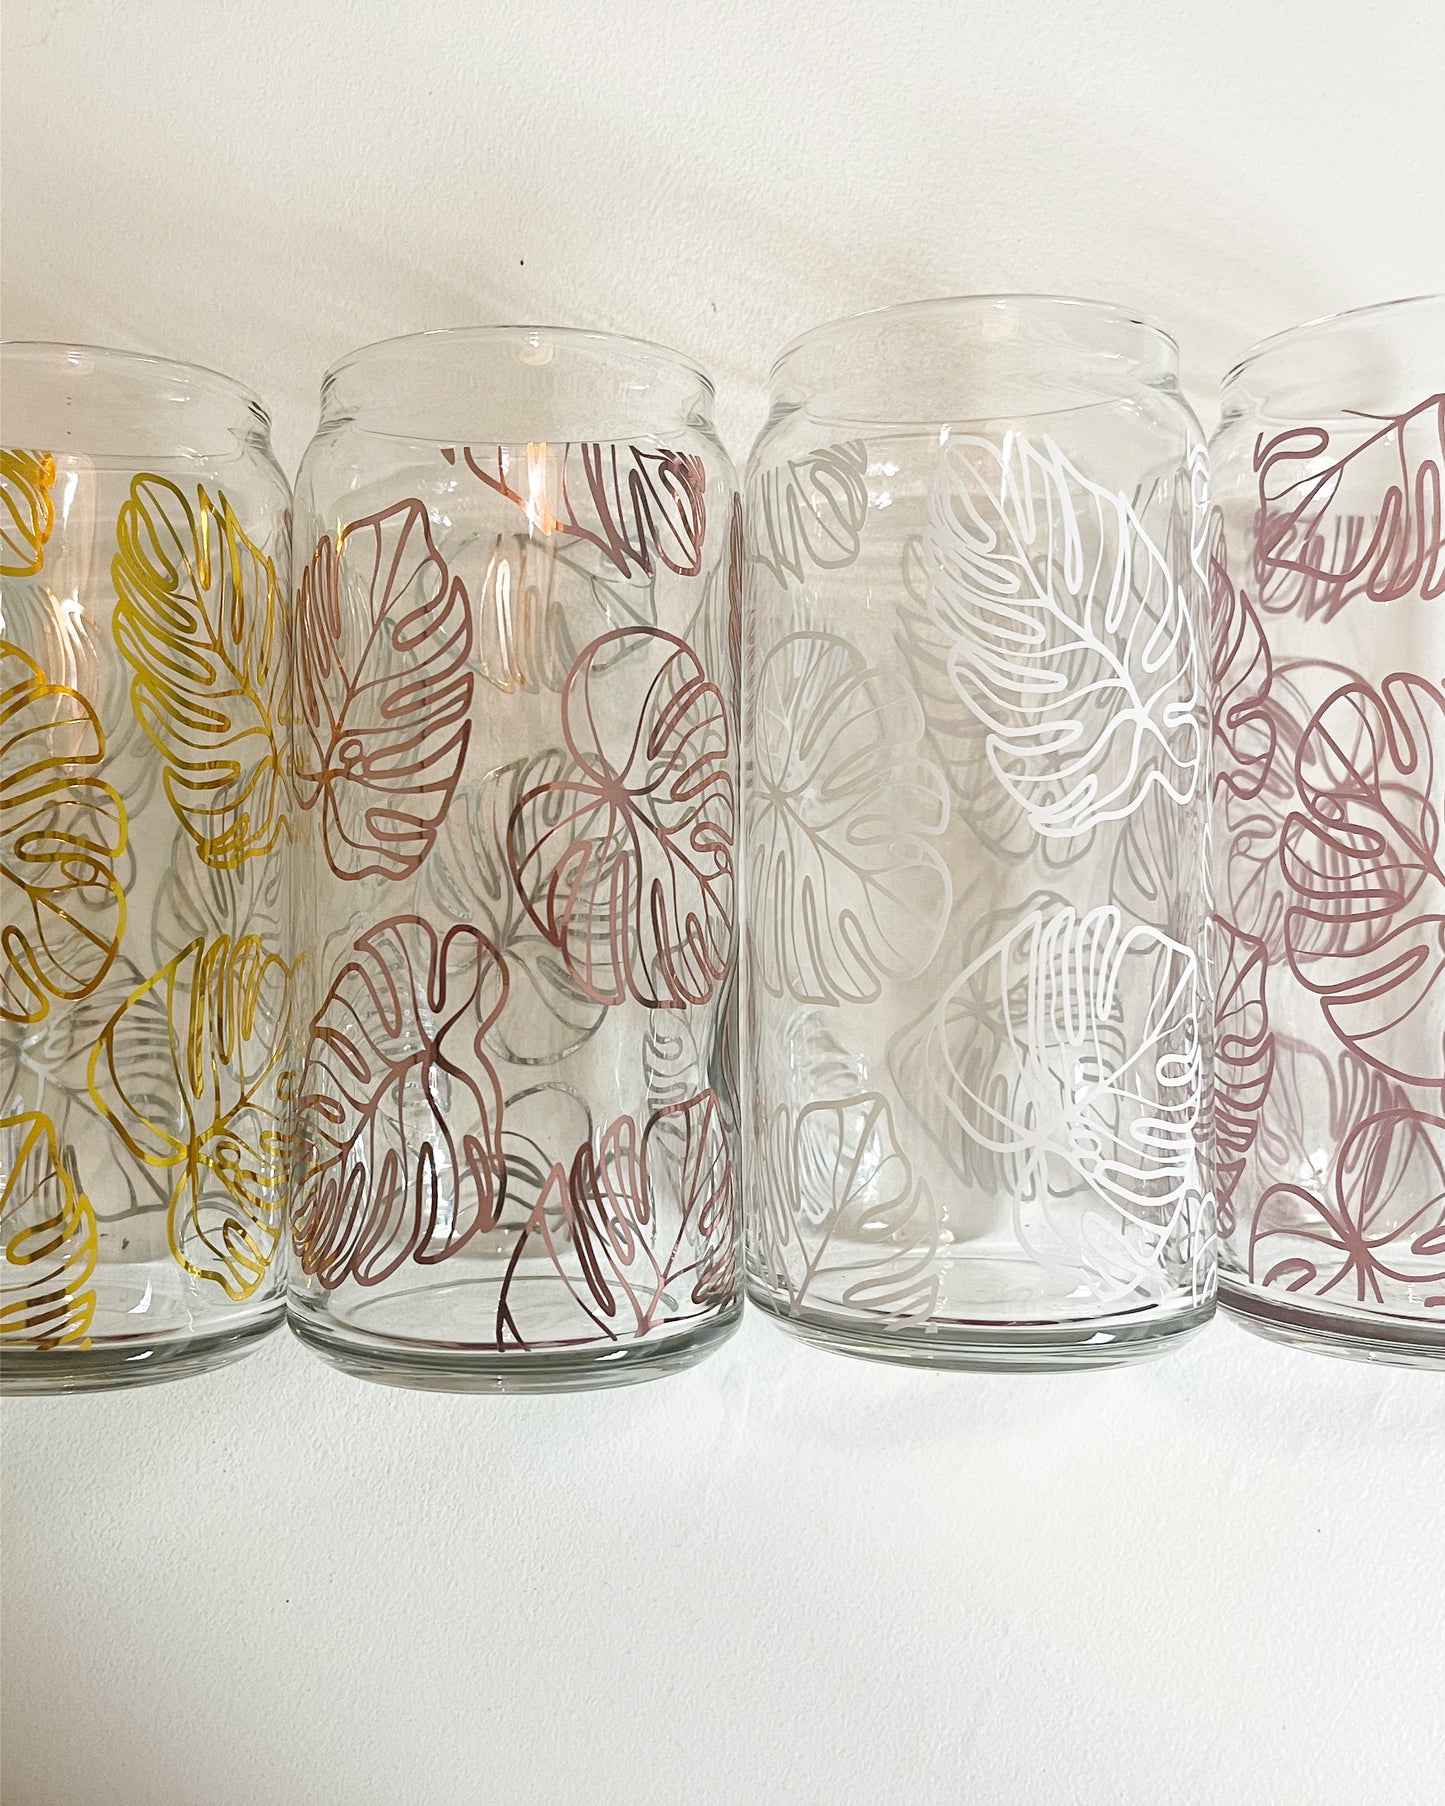 Monstera leaf wrap around Libby 'beer' Glass Cup 16oz or 20ozbamboo lids  with straw hole // libby beer can glass cup